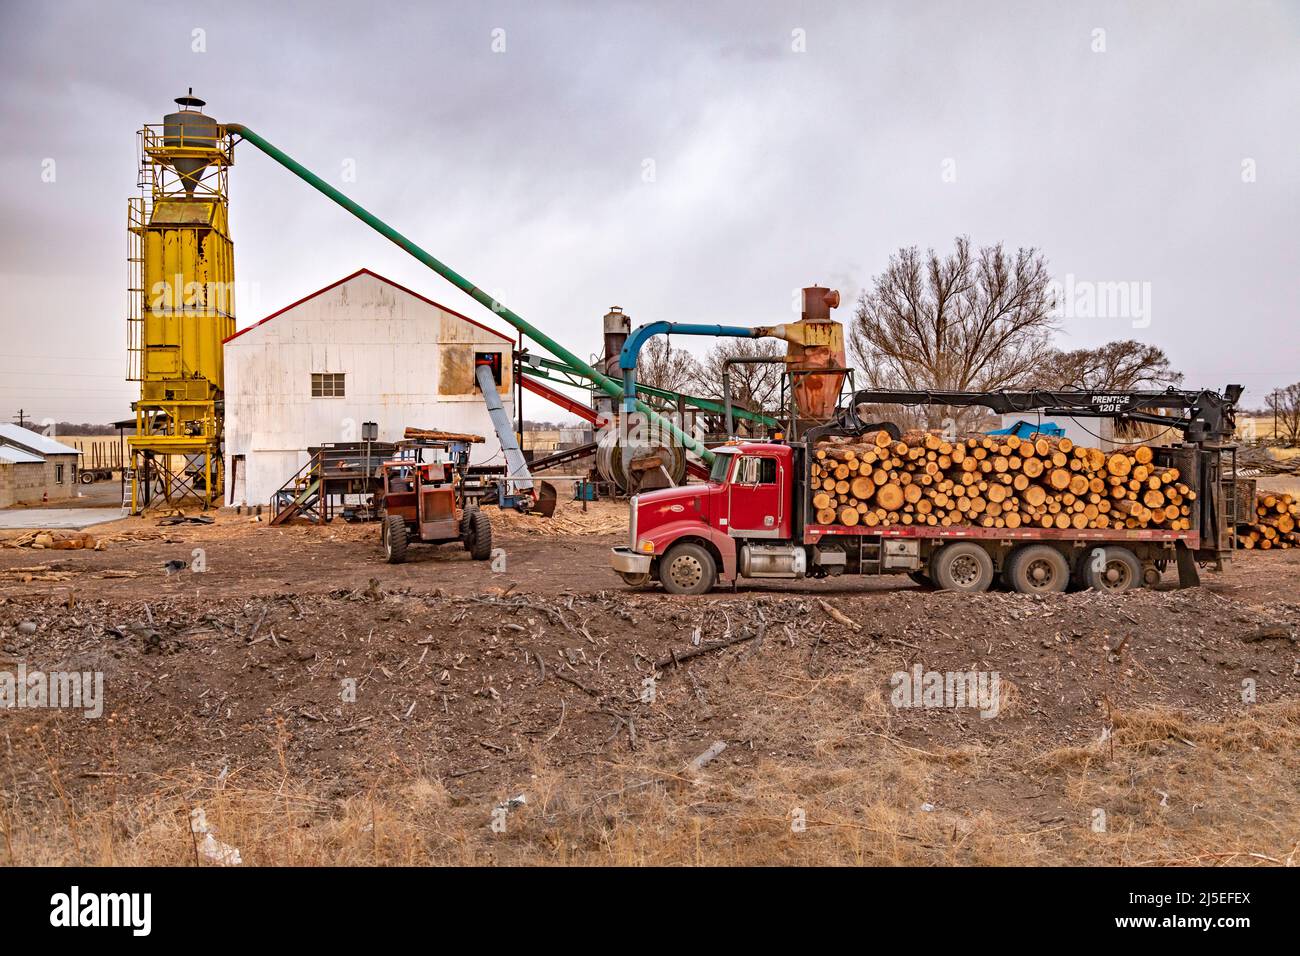 Maxwell, New Mexico - Silver Dollar Wood Products. The company makes wood shavings for animal bedding and wood wattles for erosion control. Stock Photo